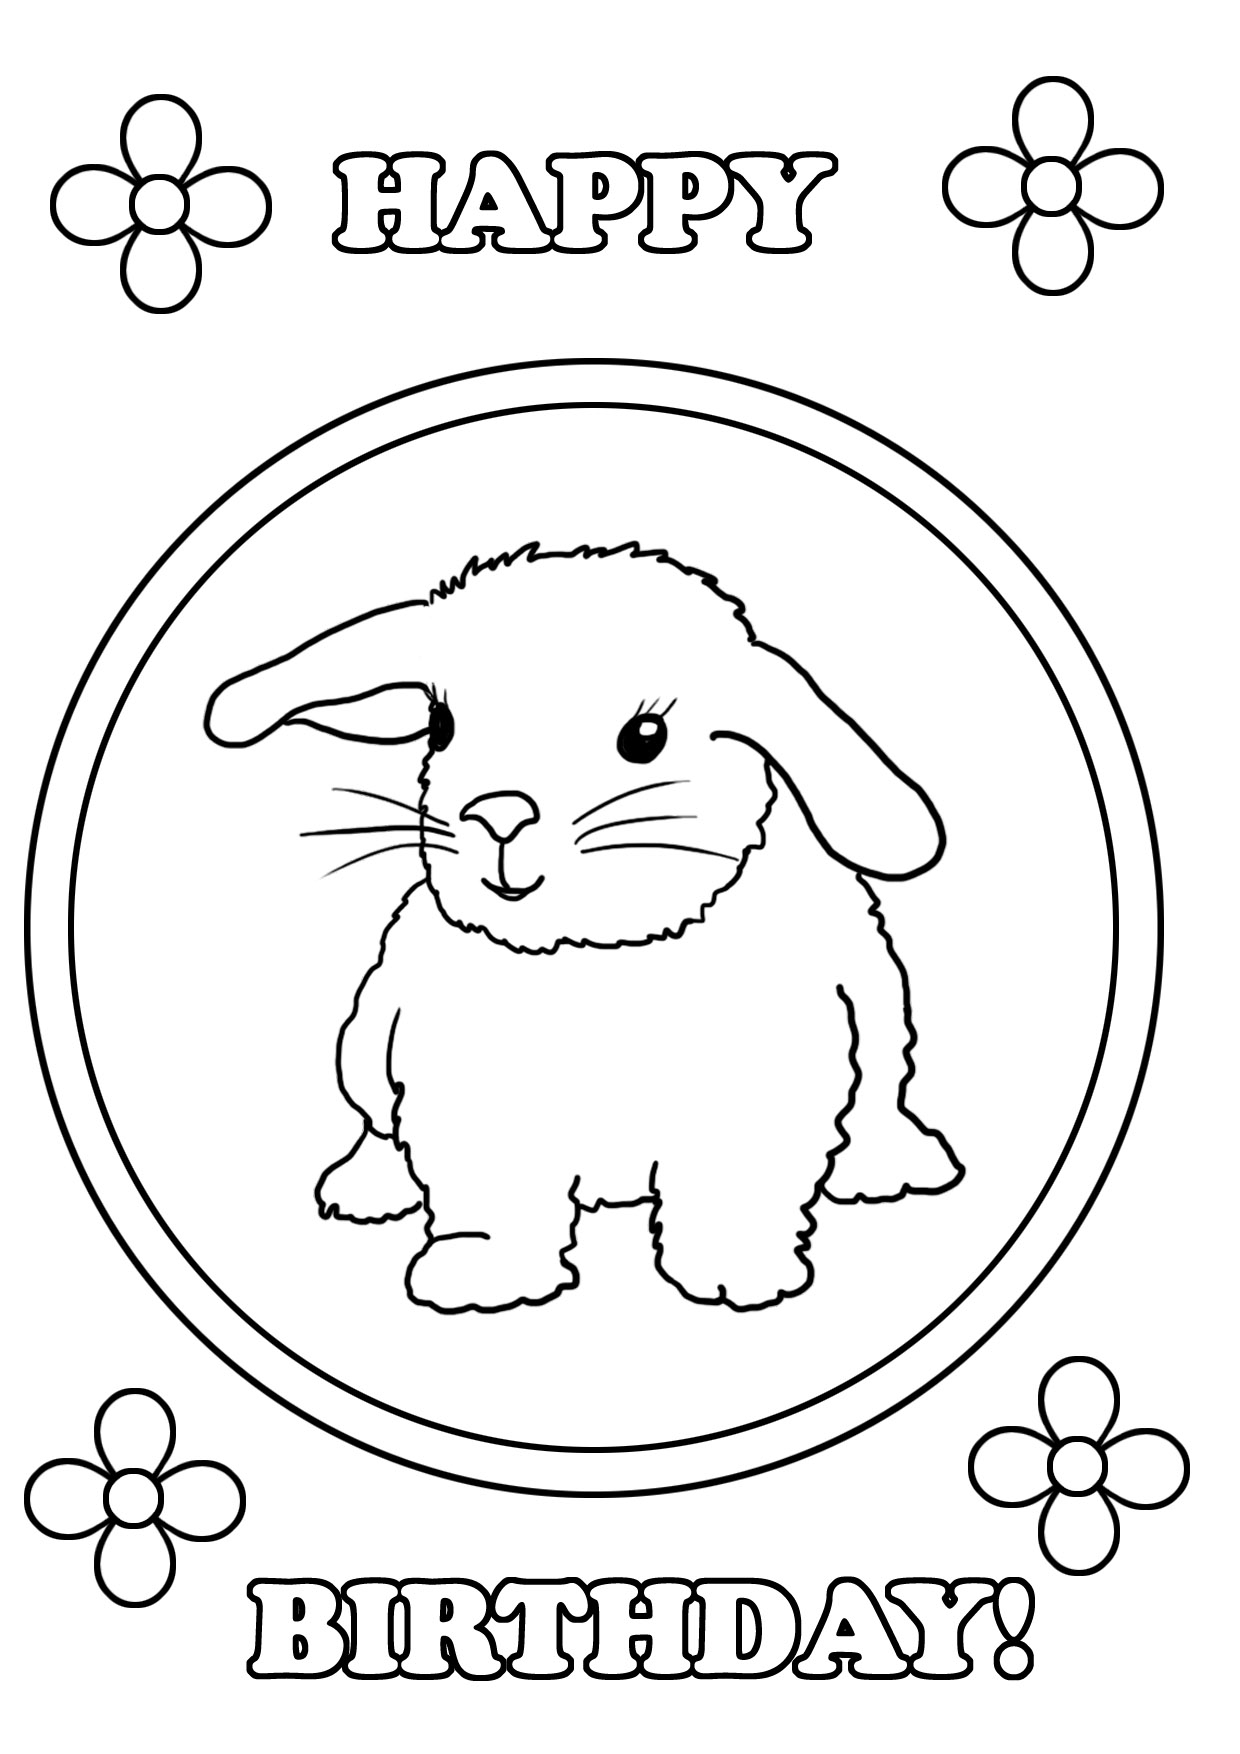 Coloring Pages For Birthday Birthday Coloring Pages